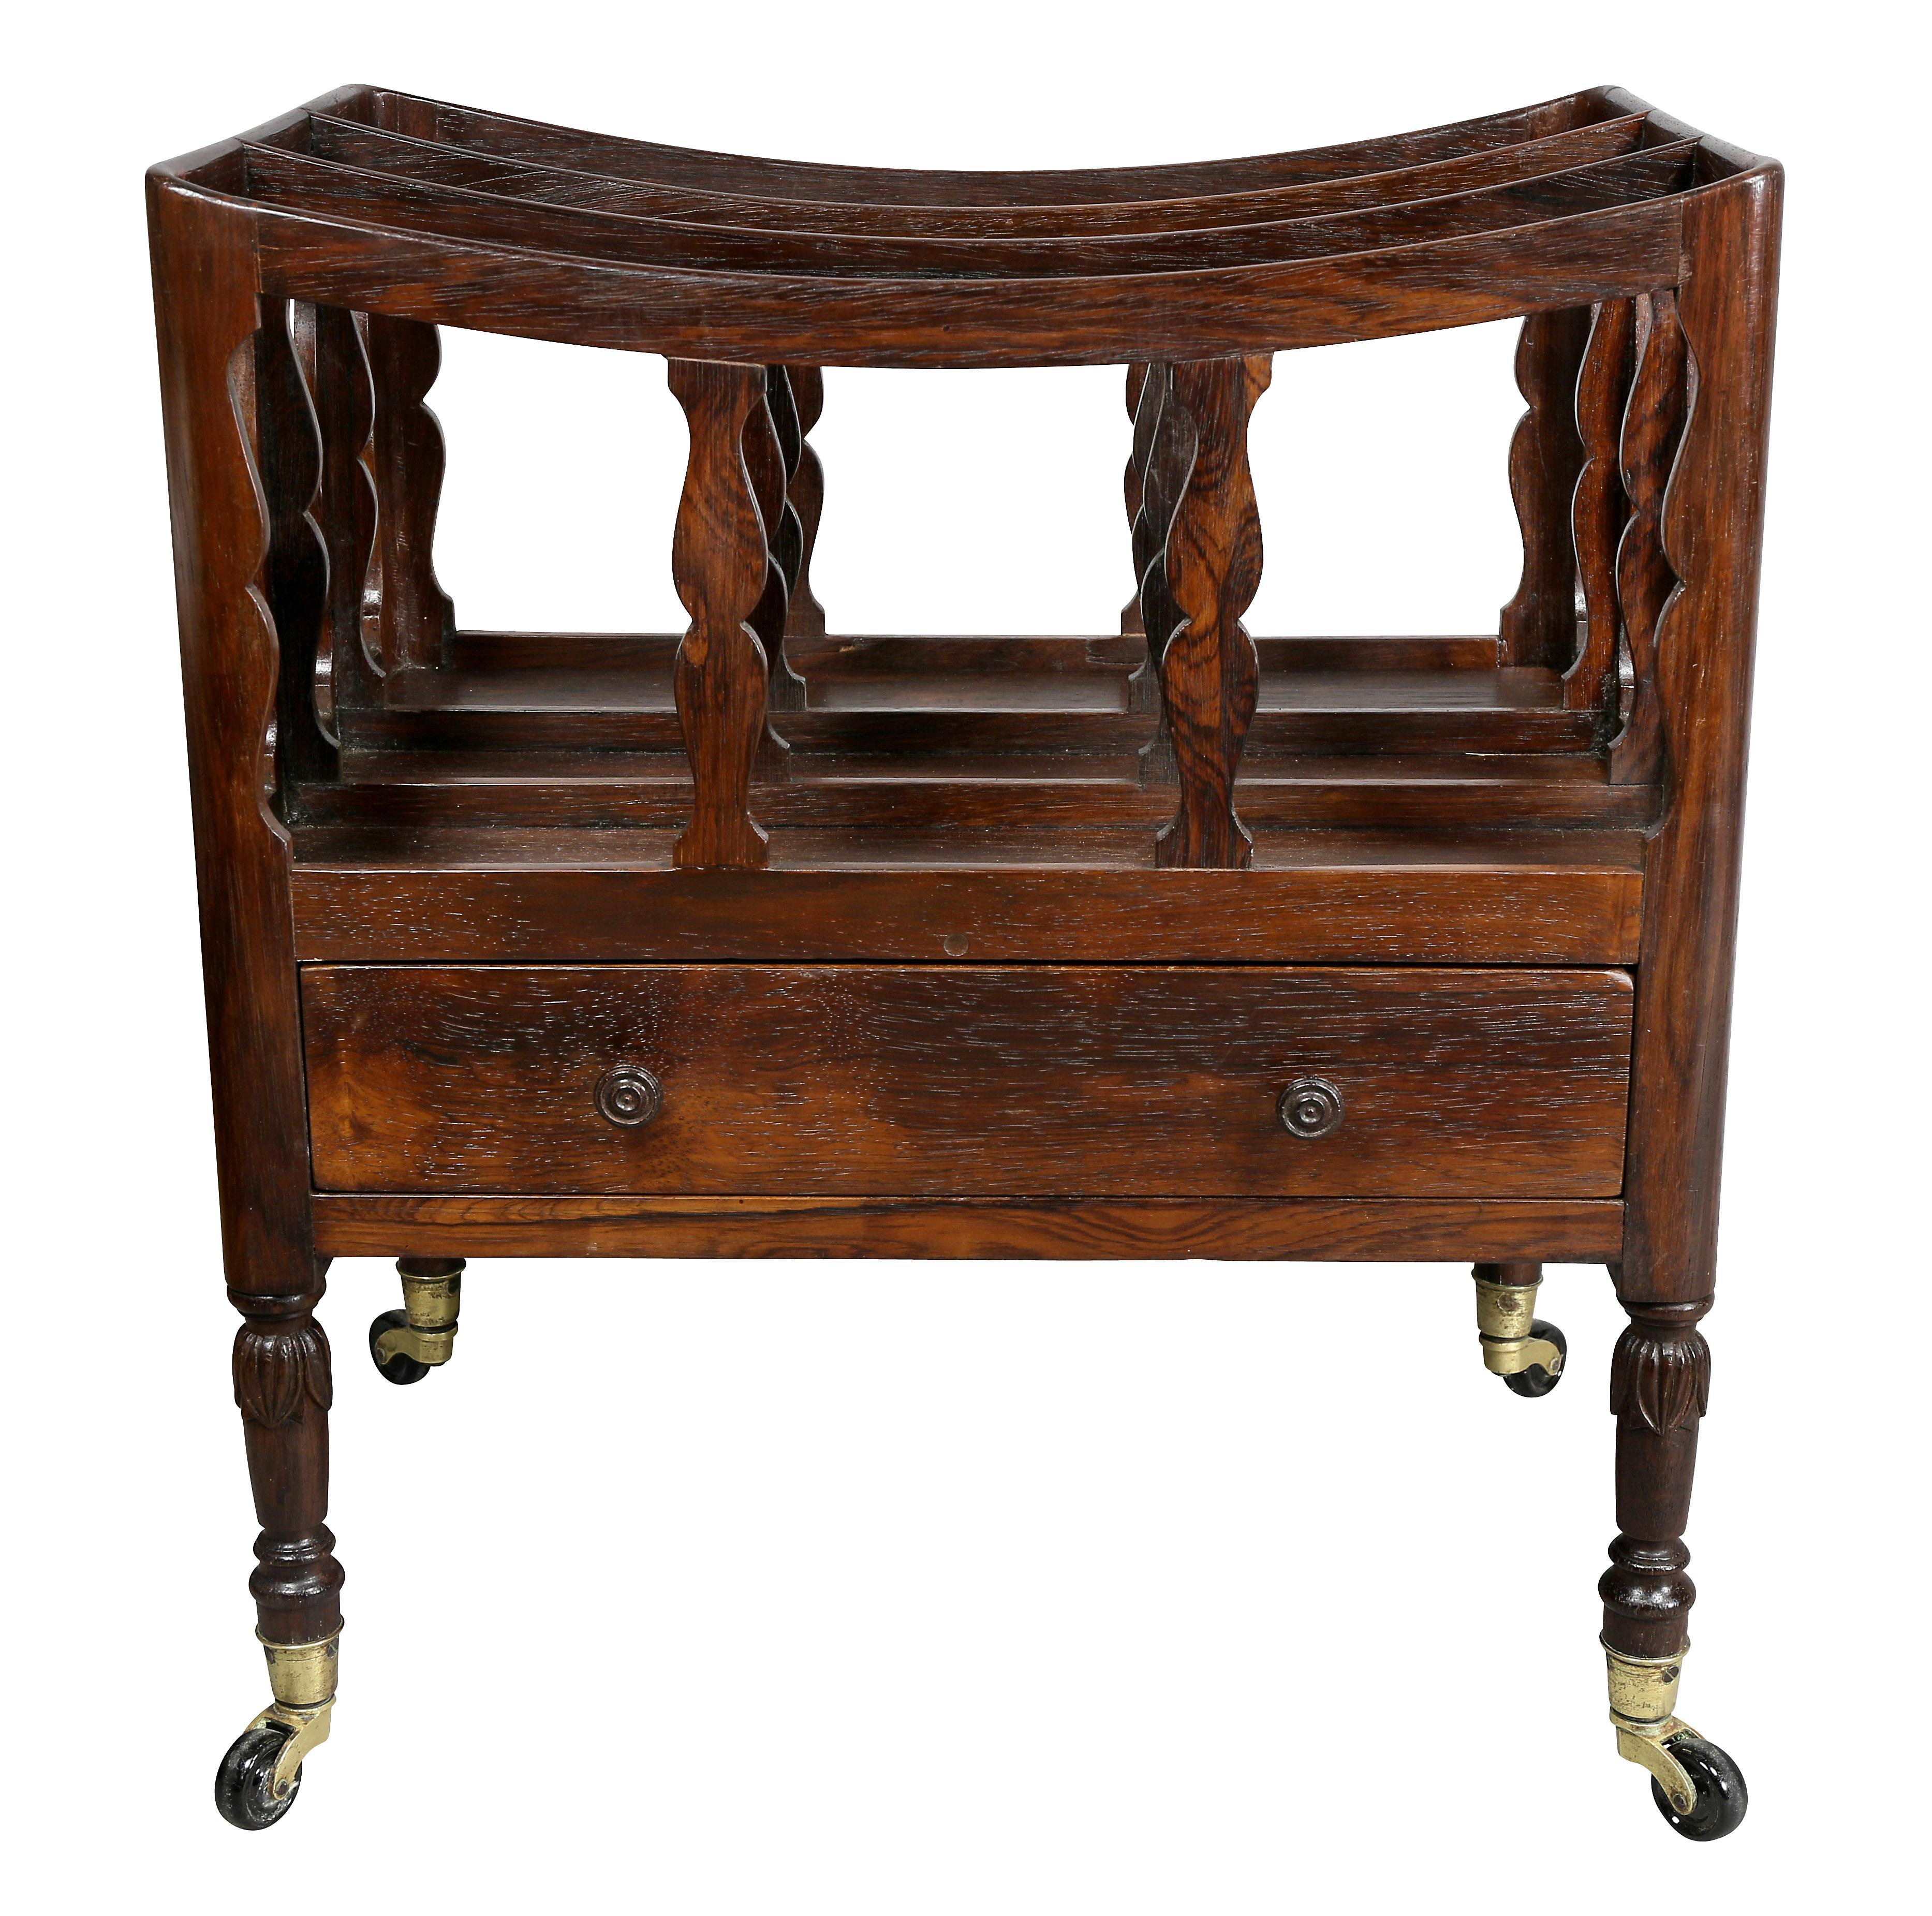 Typical form with rack section above a drawer, raised on turned carved tapered legs, casters.